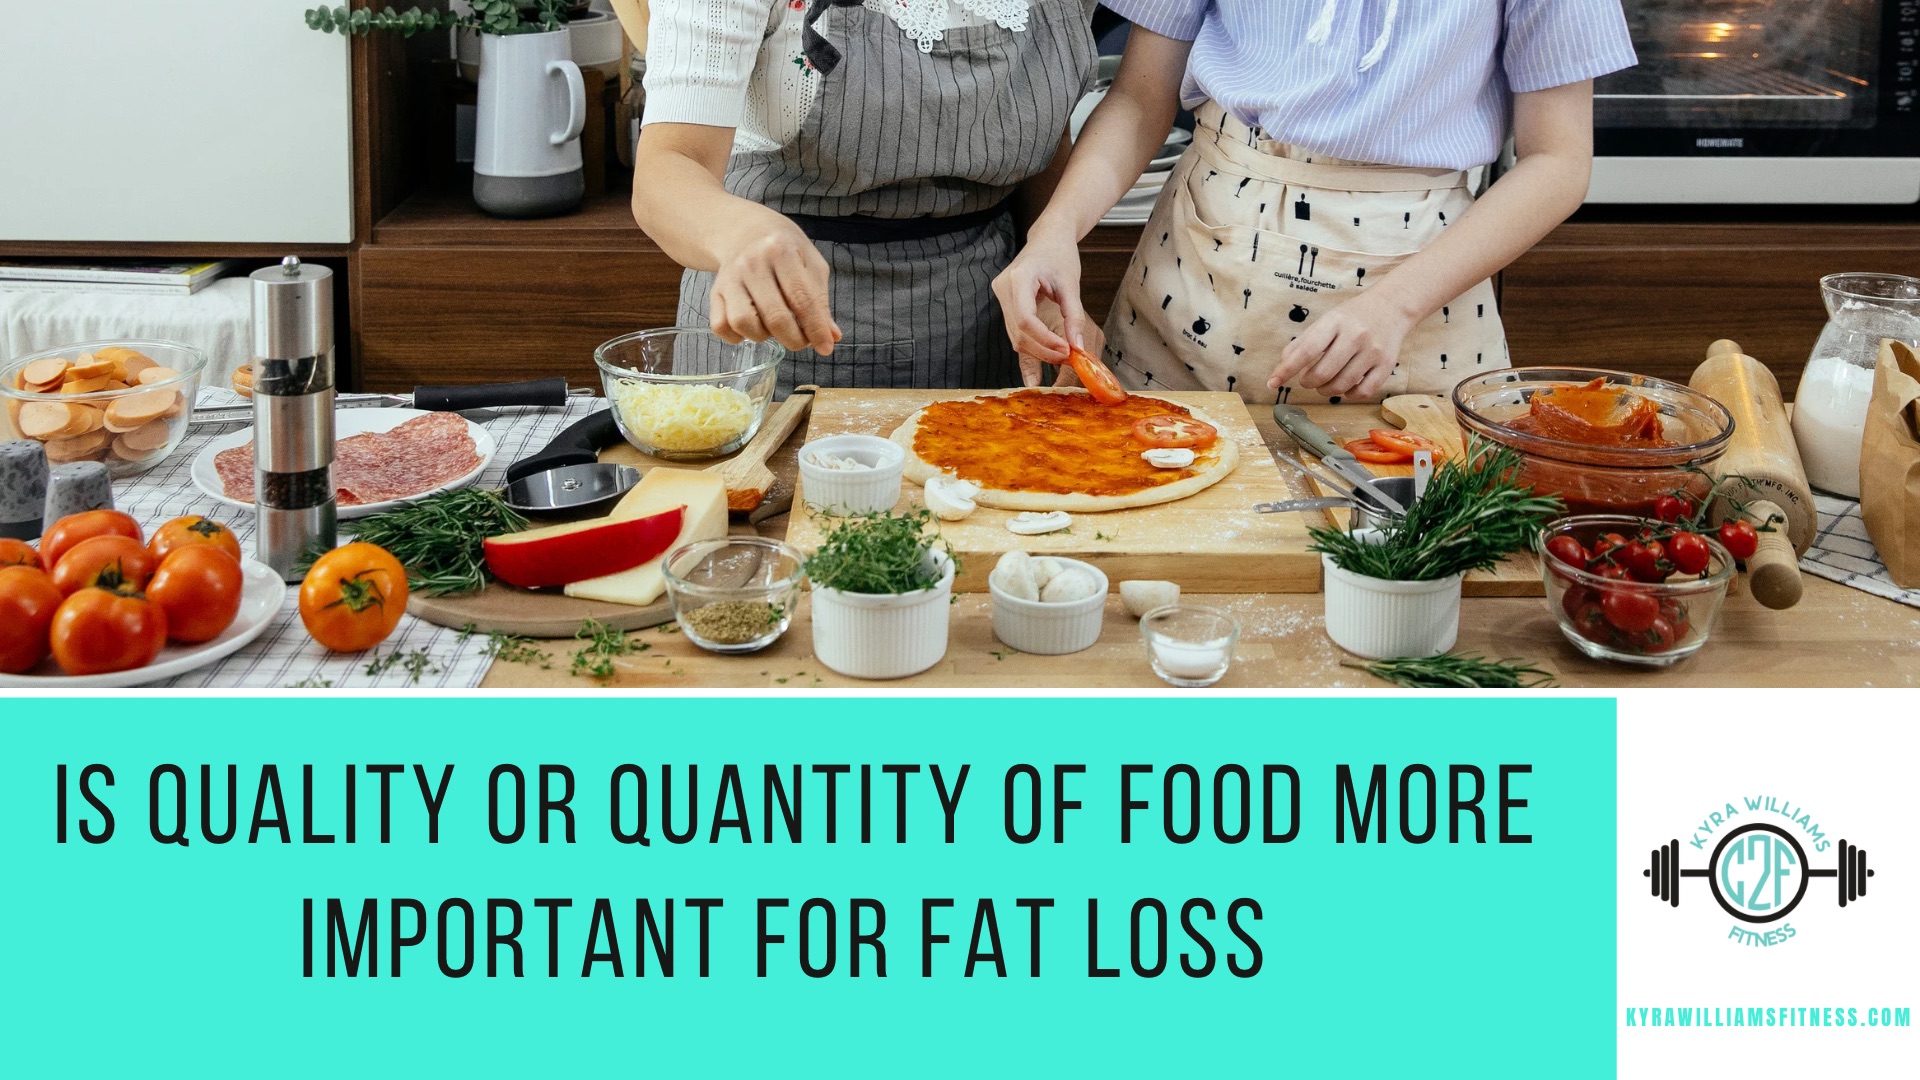 Is Quality or Quantity of Food More Important for Fat Loss?